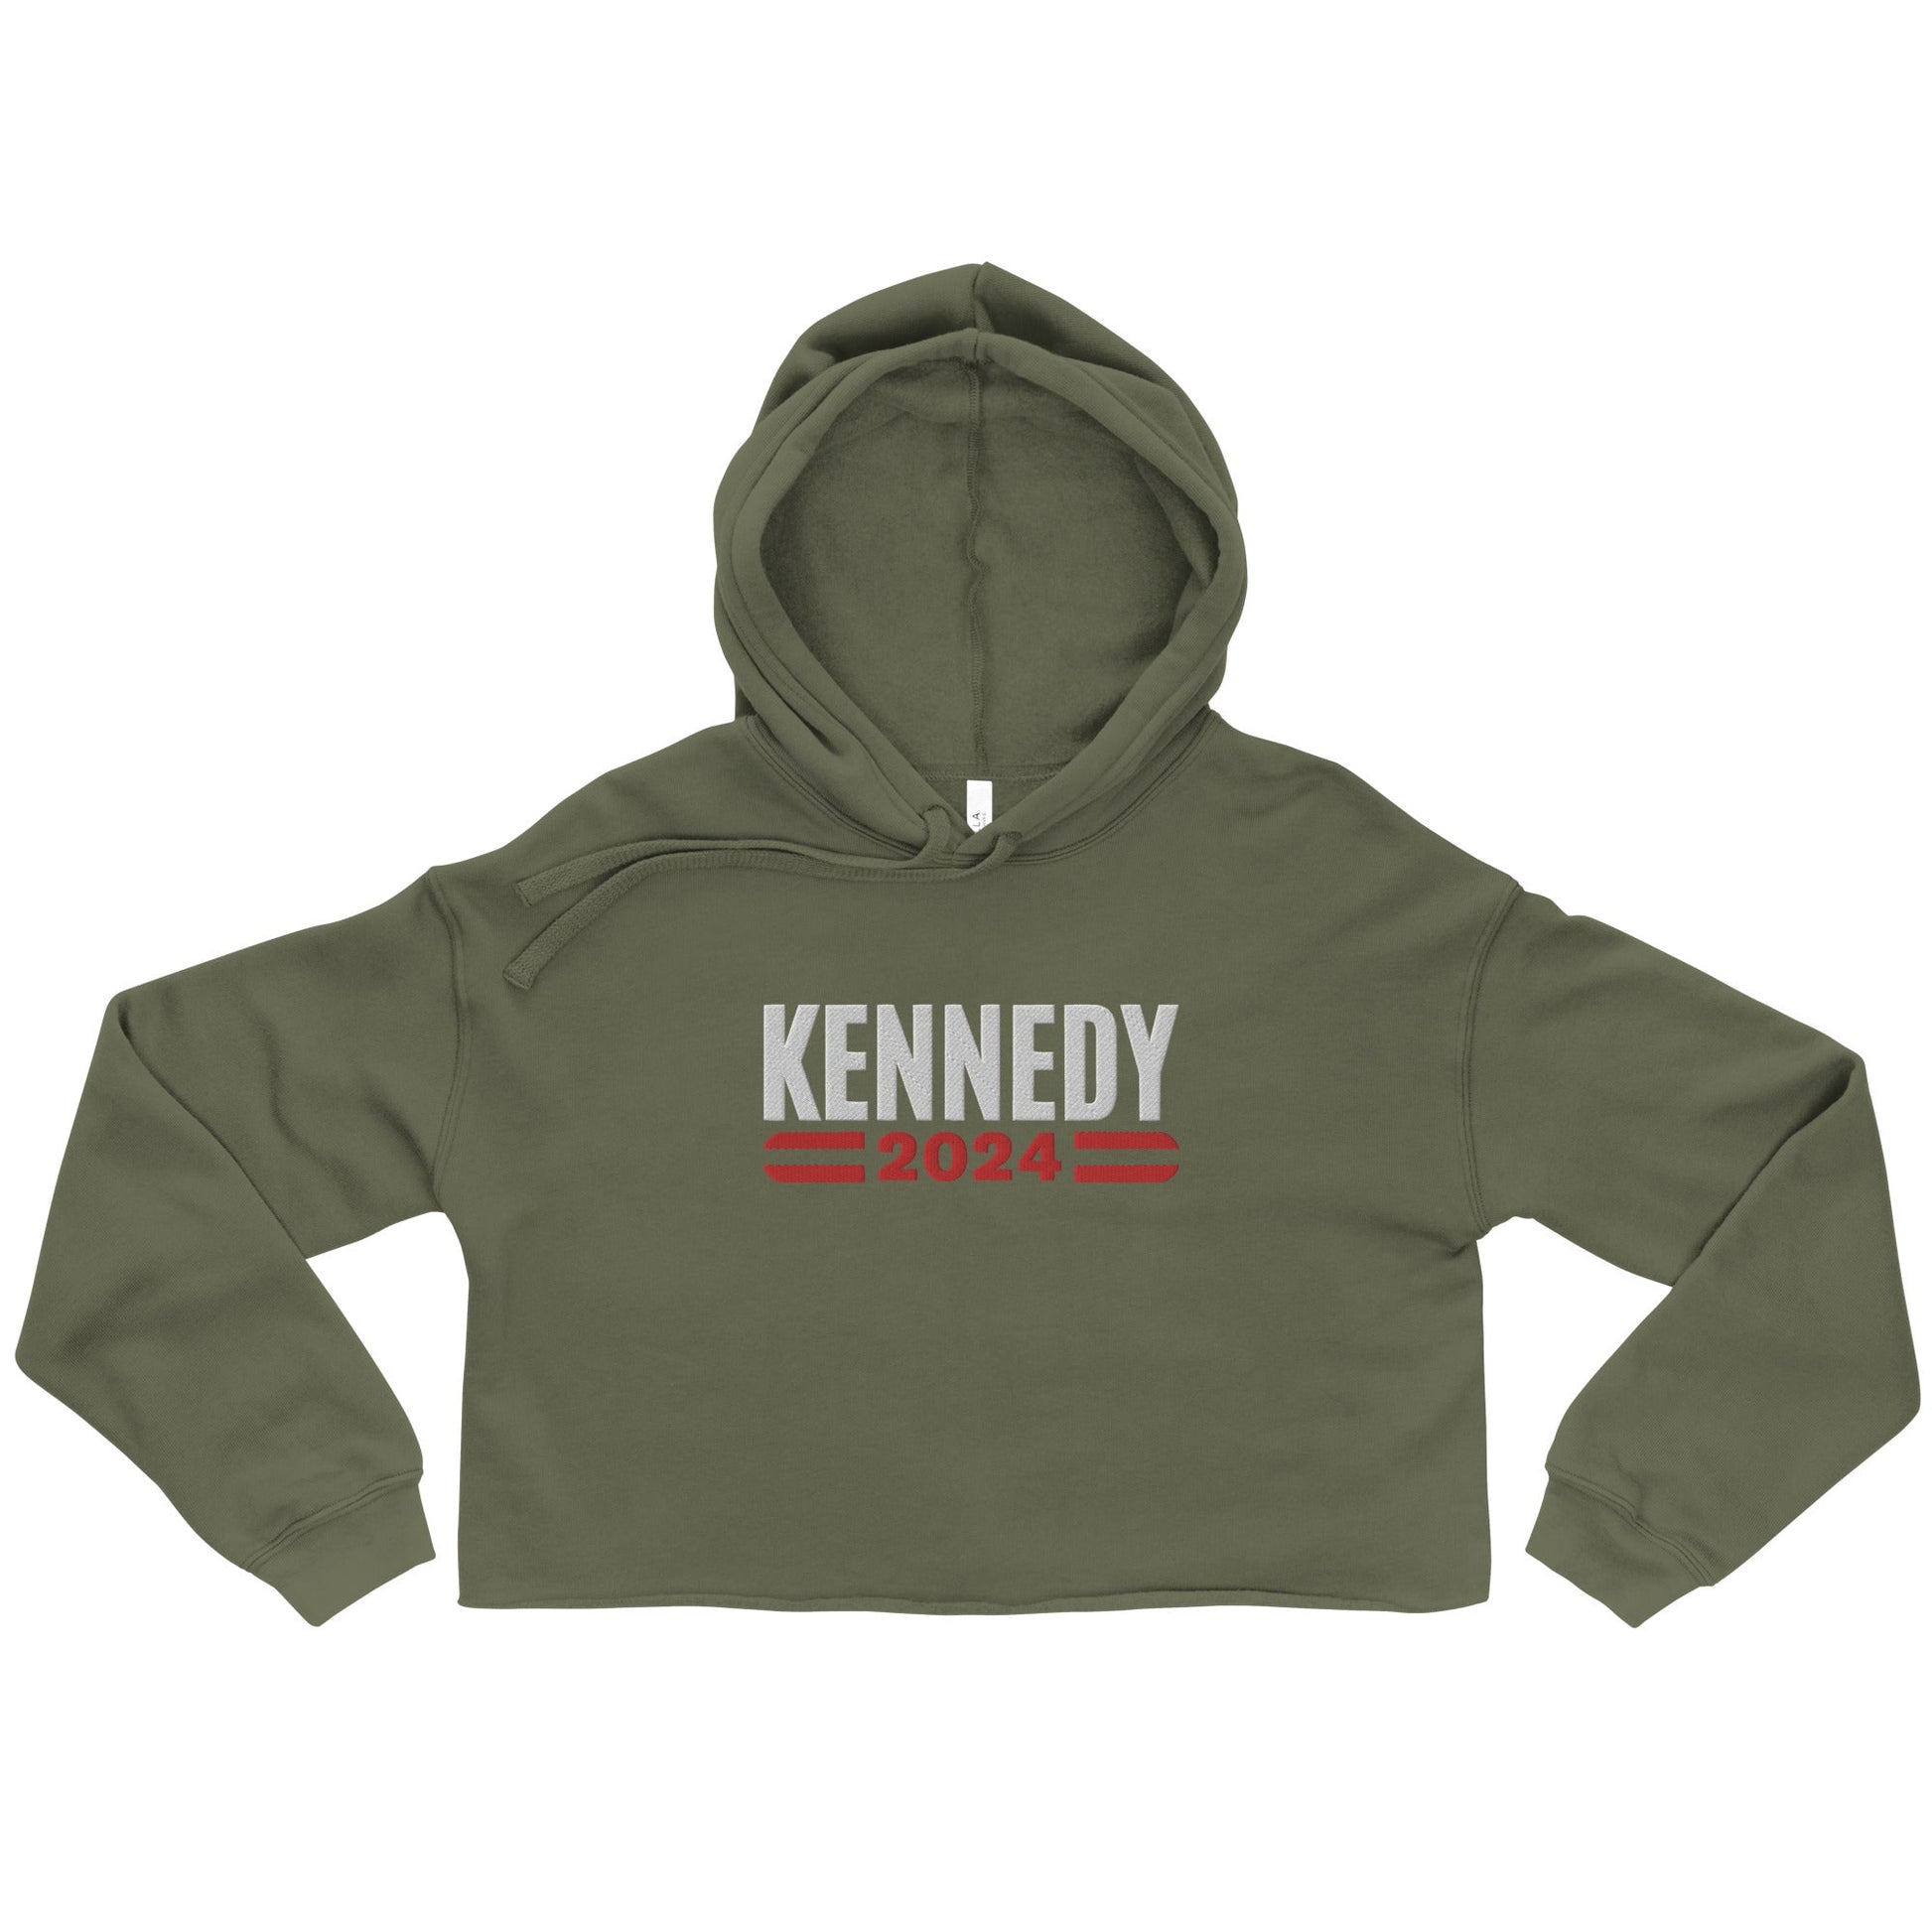 Kennedy Classic Crop Hoodie - TEAM KENNEDY. All rights reserved